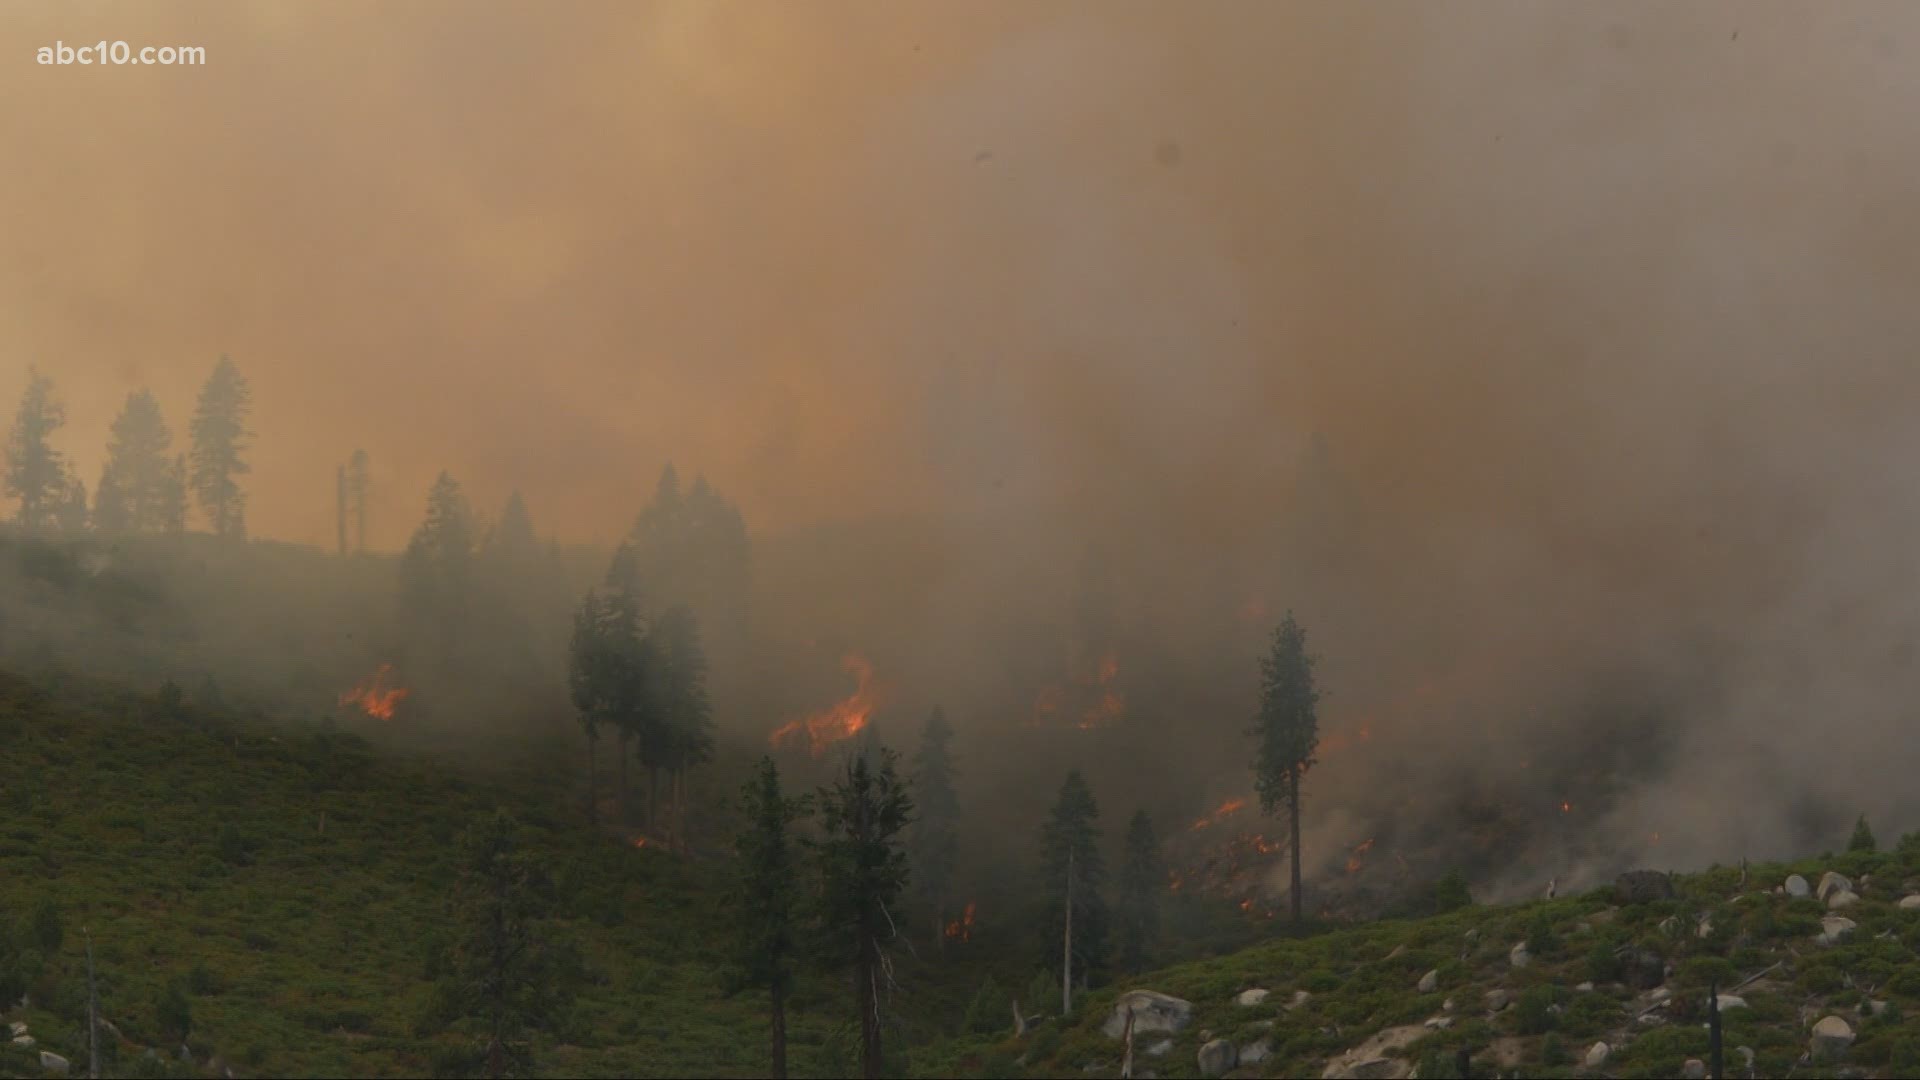 Stay with ABC10 for the latest updates on the Frenchtown, Tamarack, and Dixie Fires.